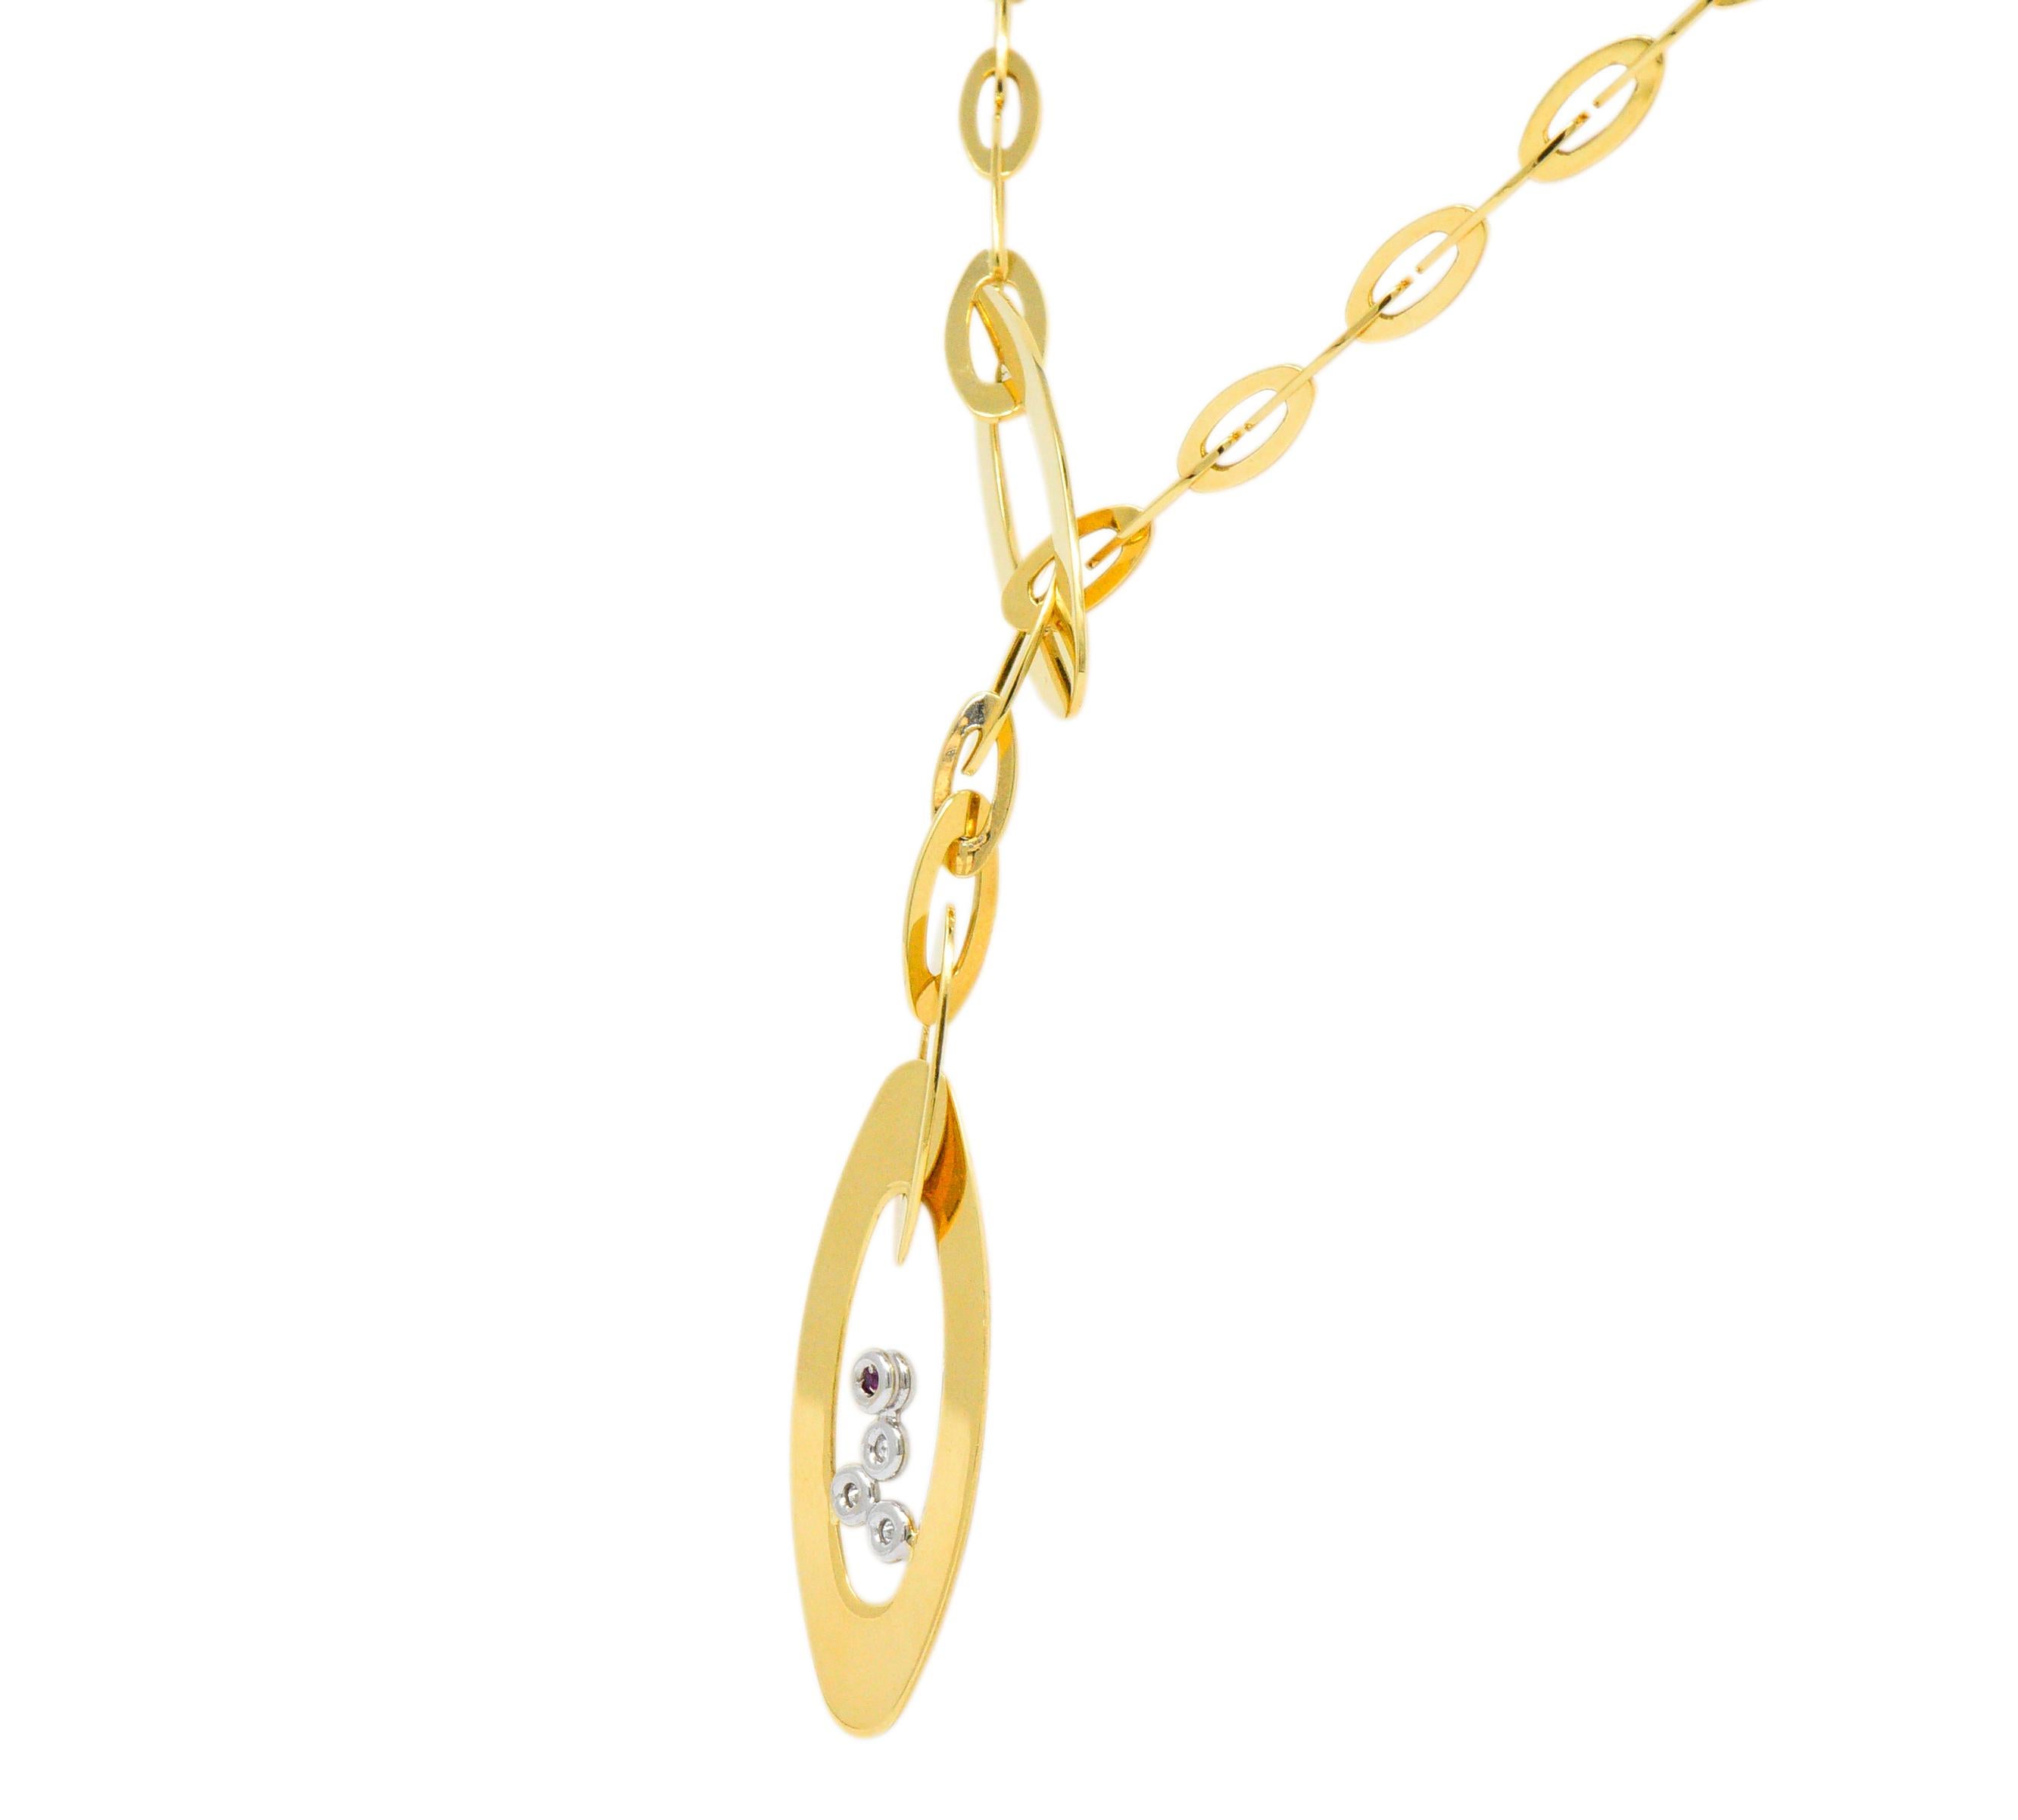 Lariat style necklace comprised of polished gold oval links 

Terminating as two oversized oval links, one threaded through the other

Centering four white gold bezels accented by four round brilliant cut diamonds weighing in total approximately